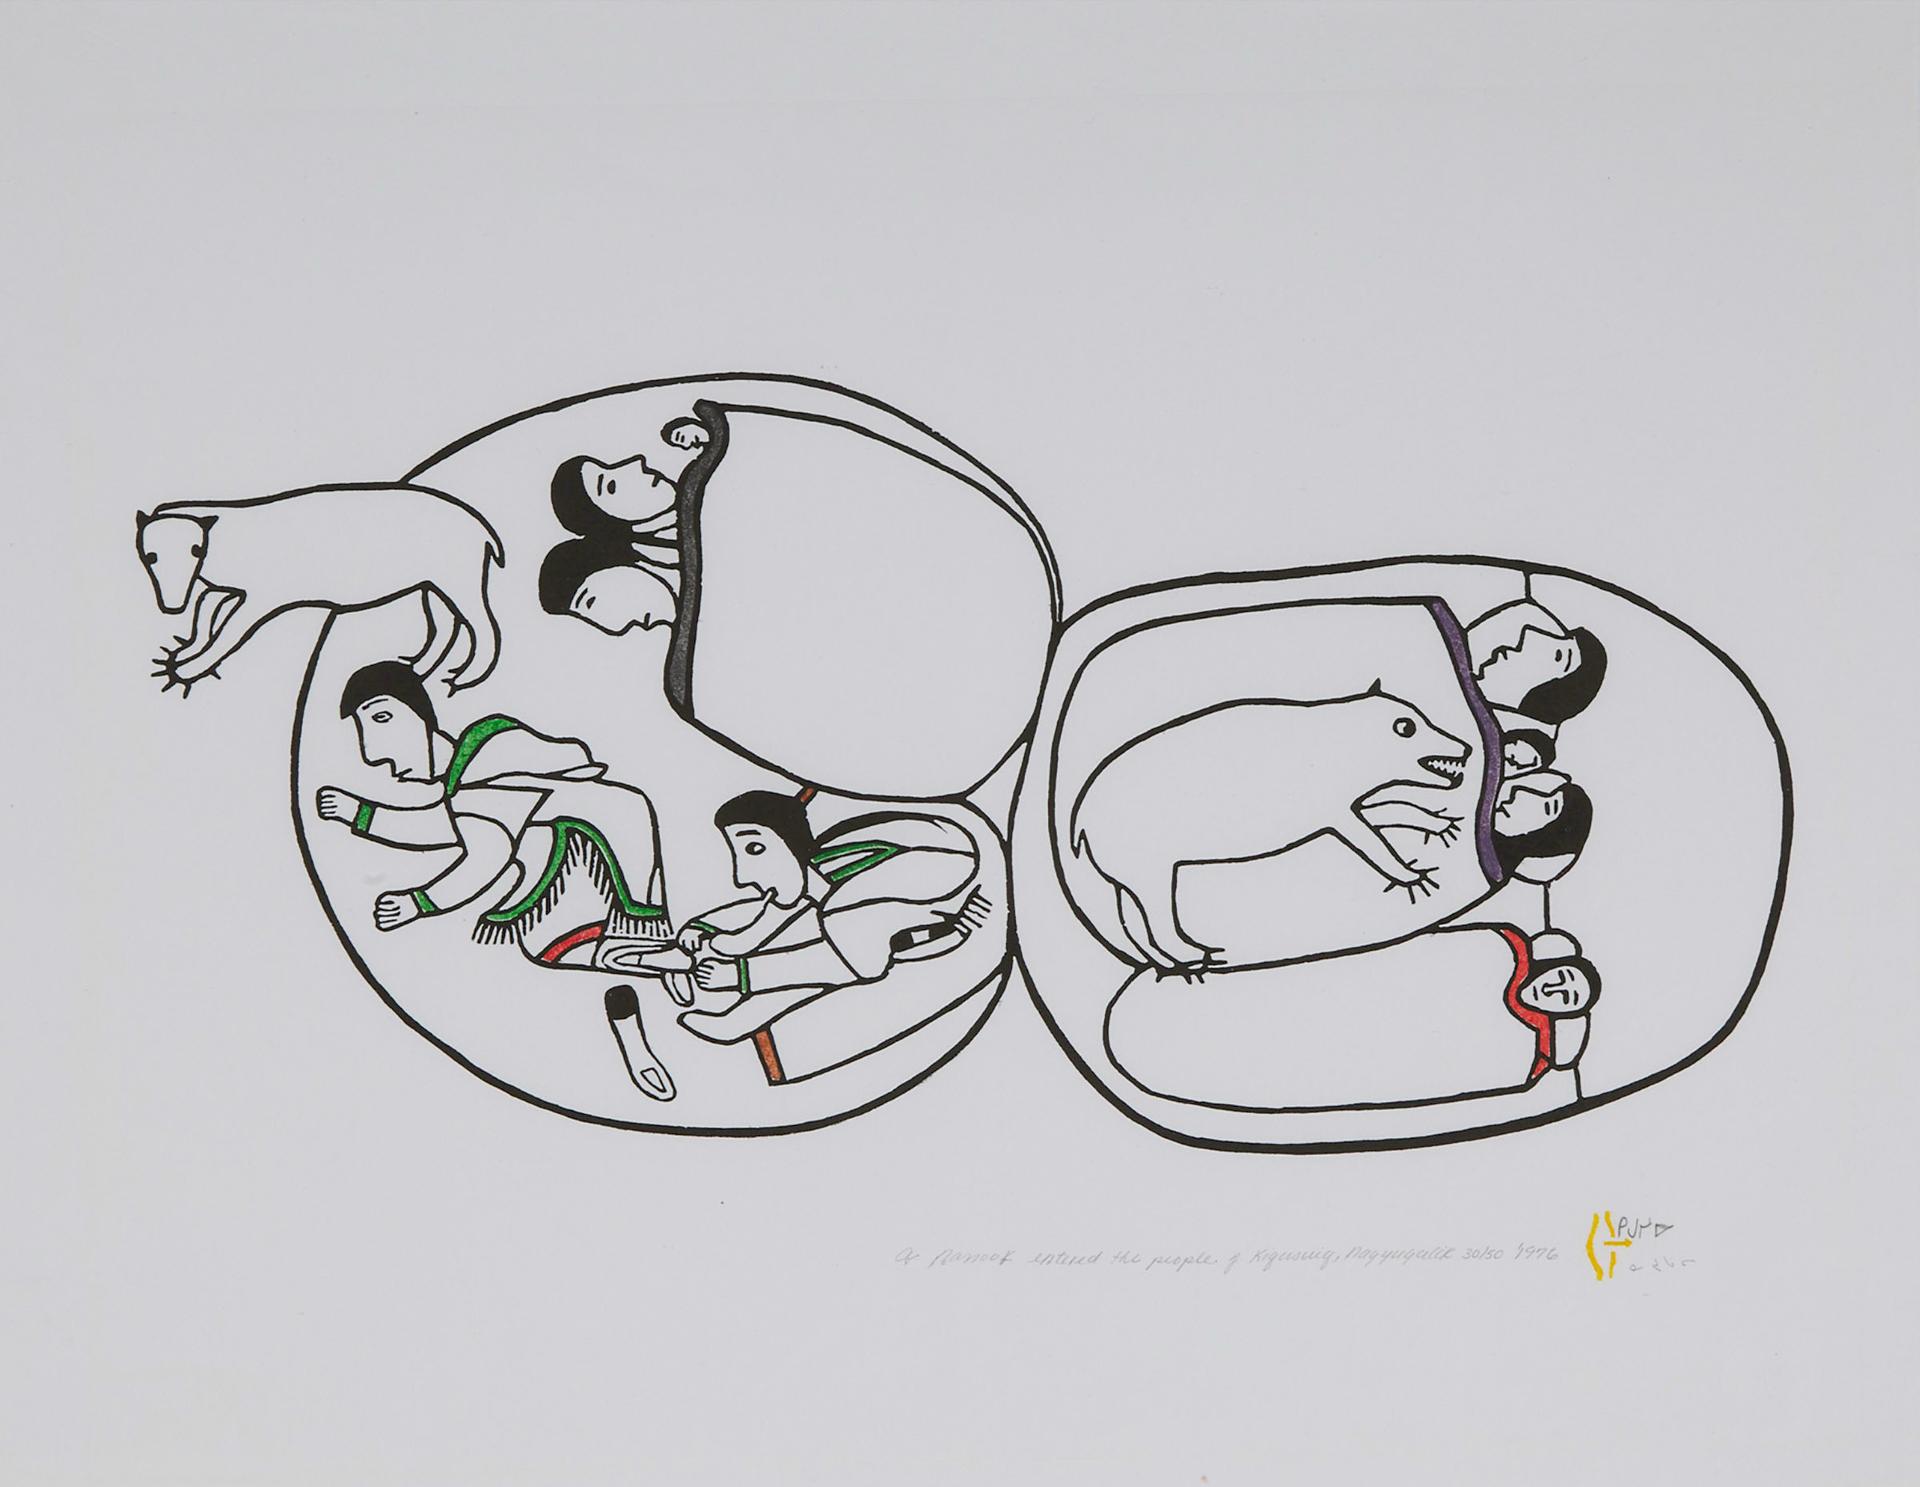 Janet Kigusiuq (1926-2005) - A Nanook Entered The People, 1976